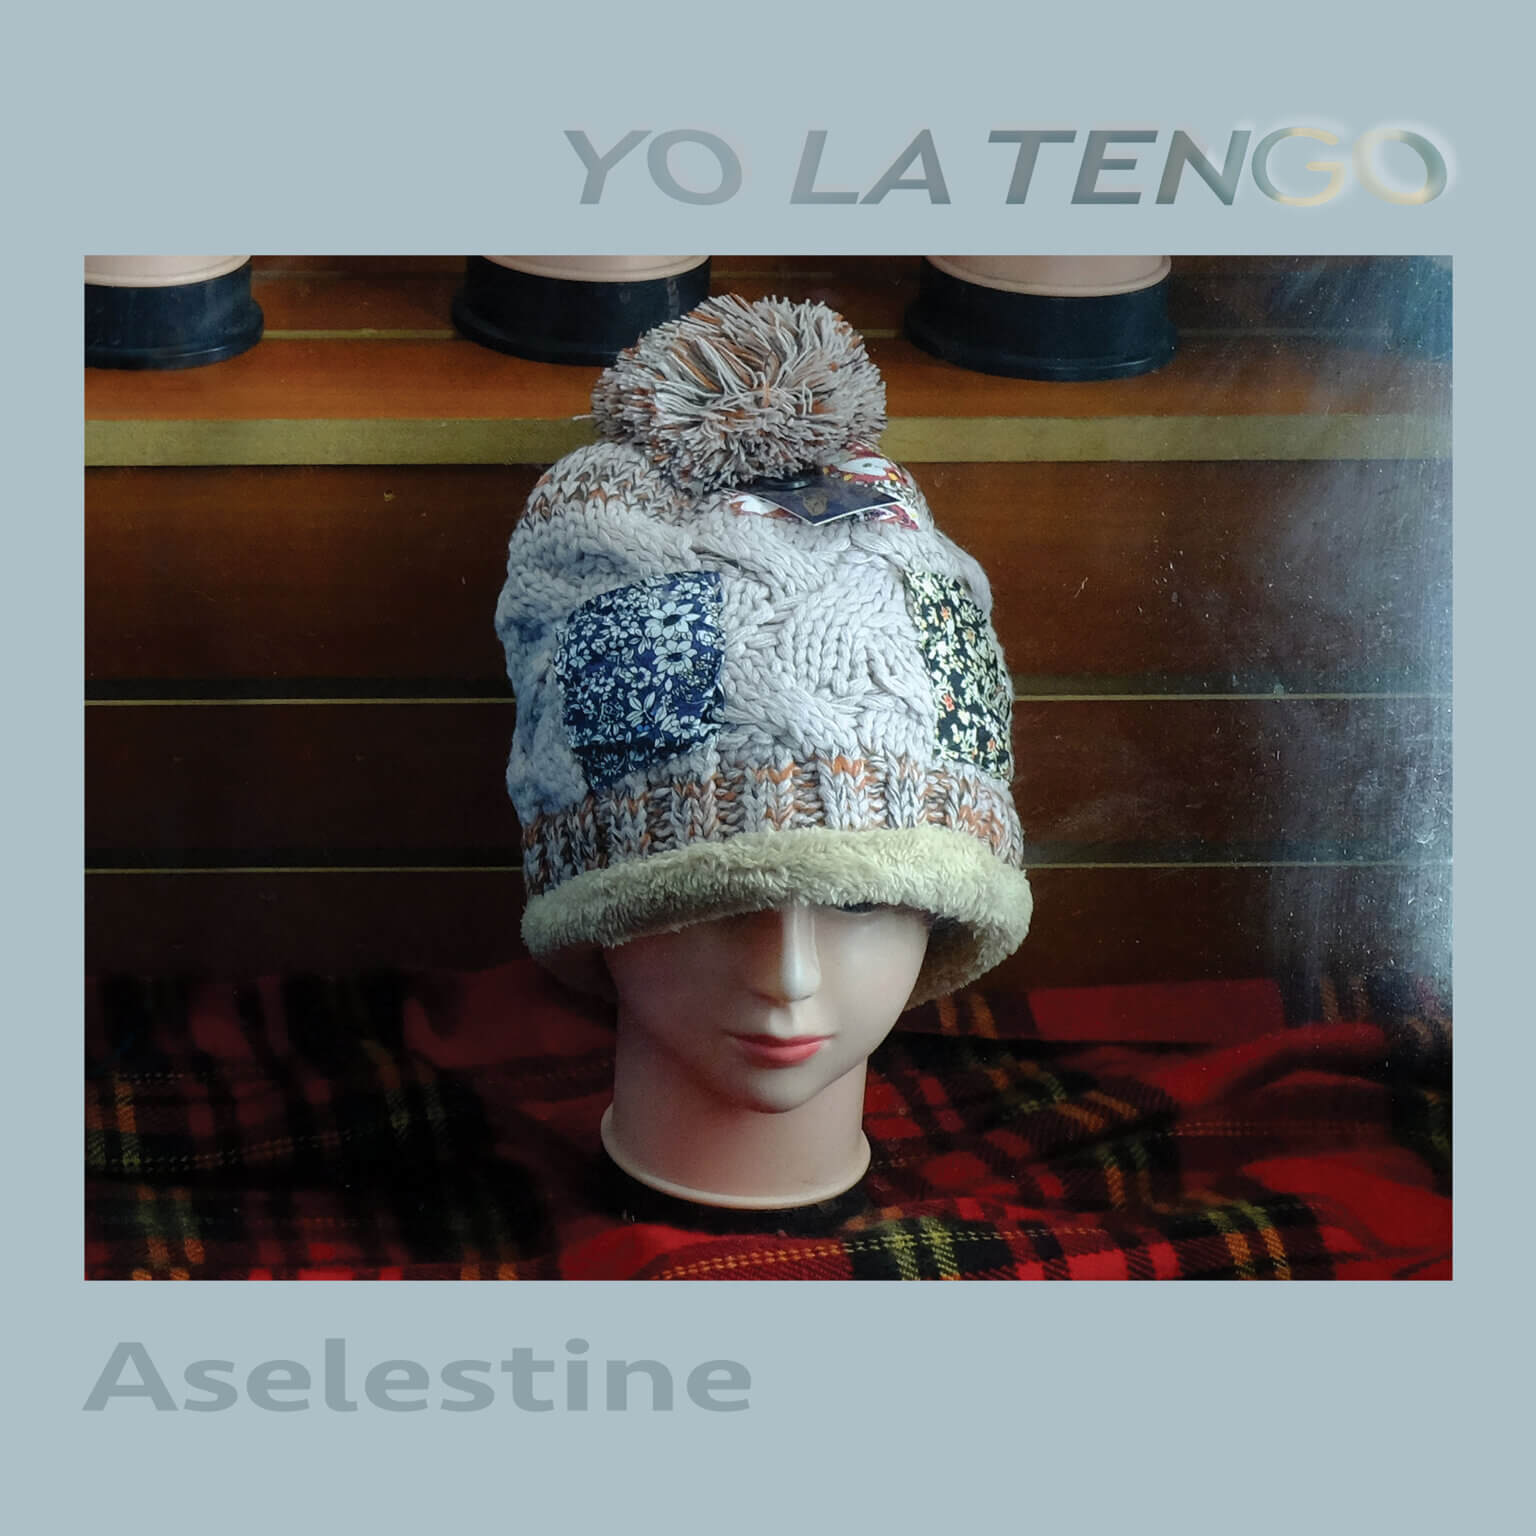 Yo La Tengo Share New Single “Aselestine." The track is off the beloved indie trio's forthcoming release This Stupid World